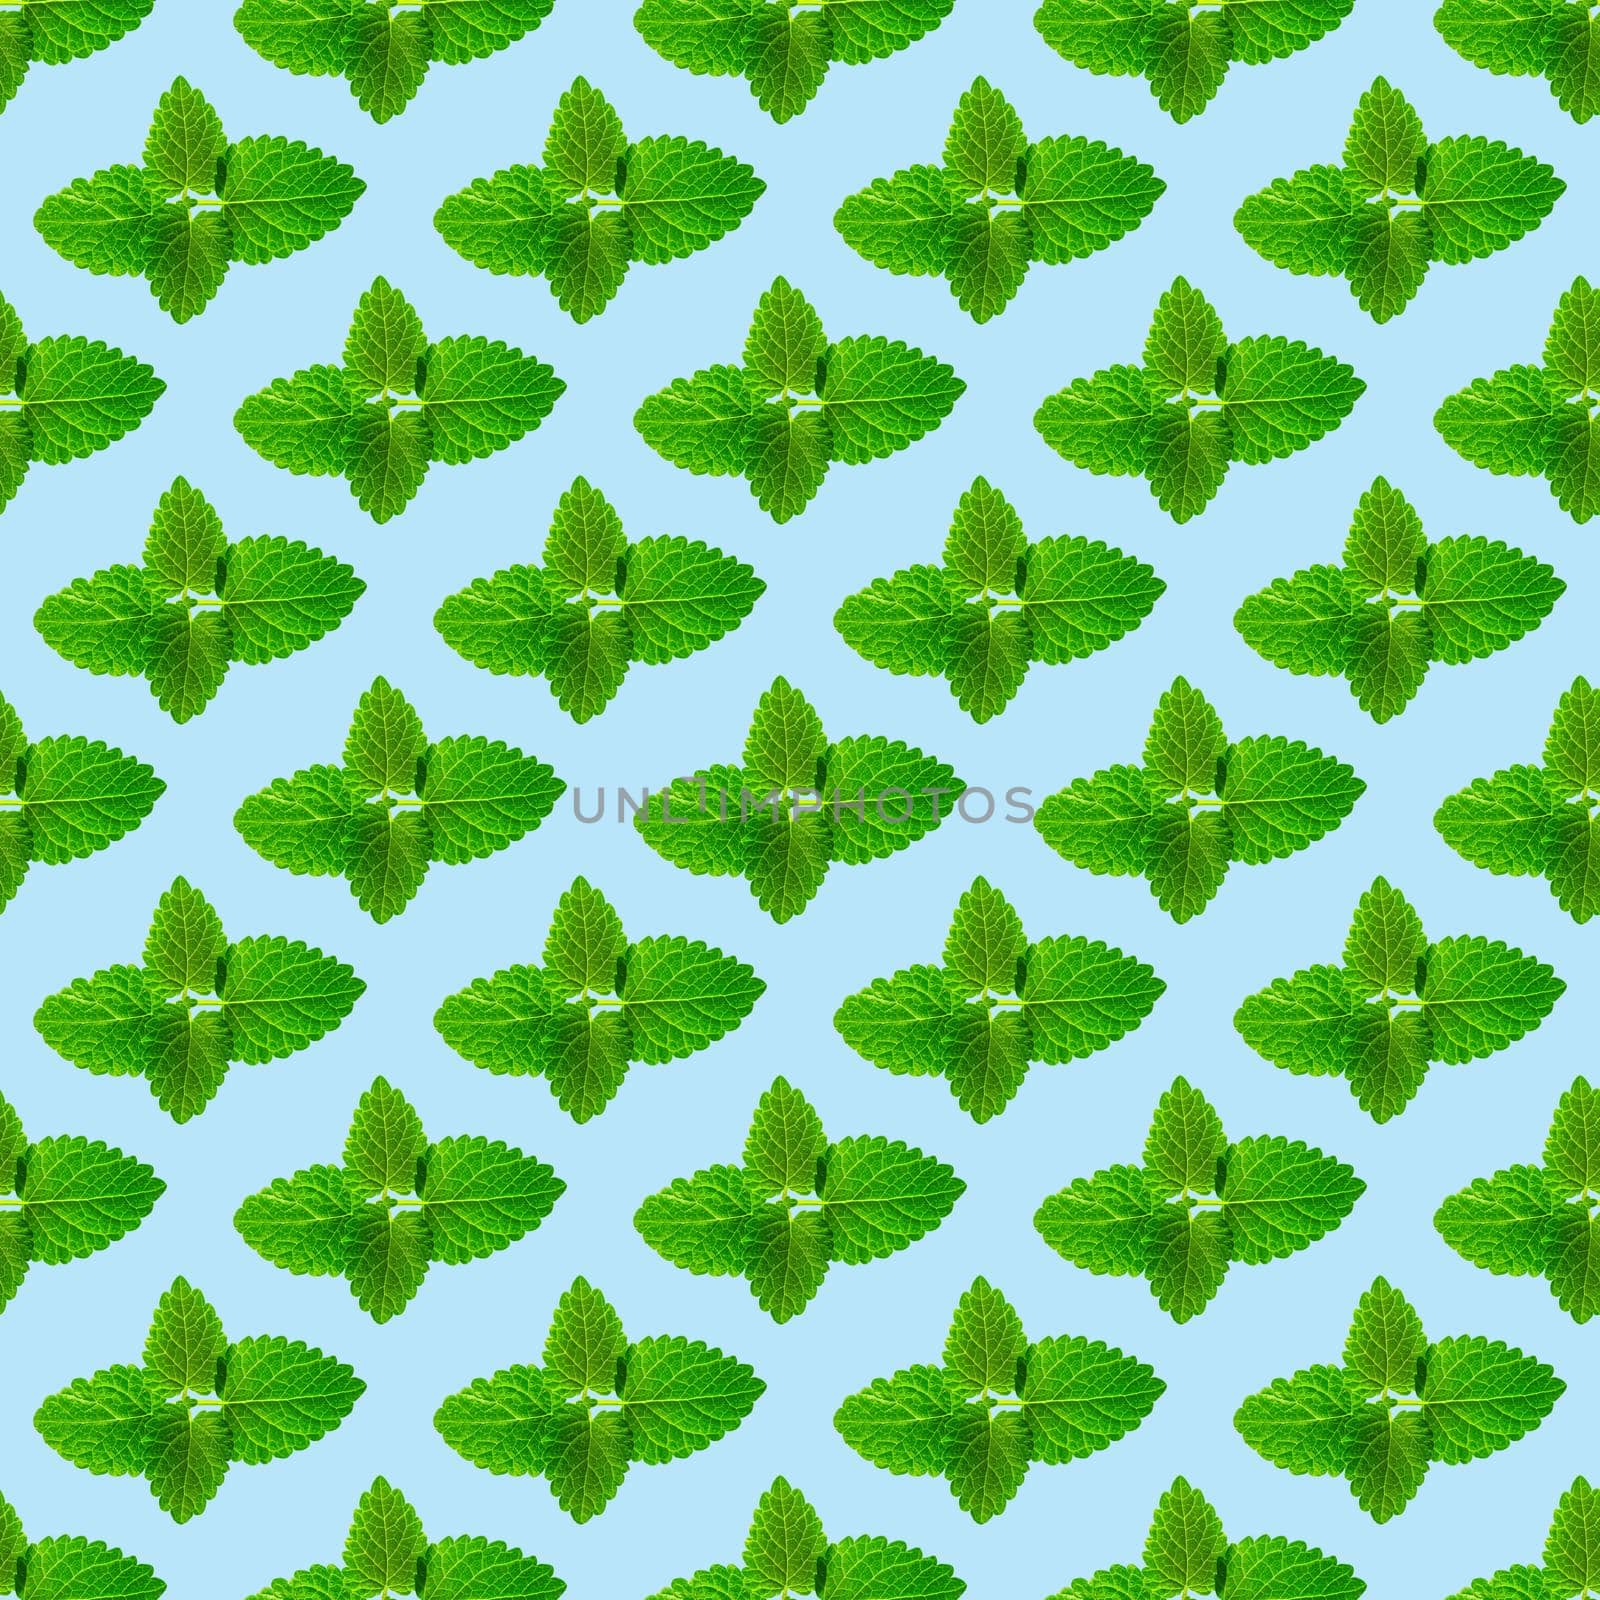 Seamless pattern of fresh mint leaves on blue background by PhotoTime